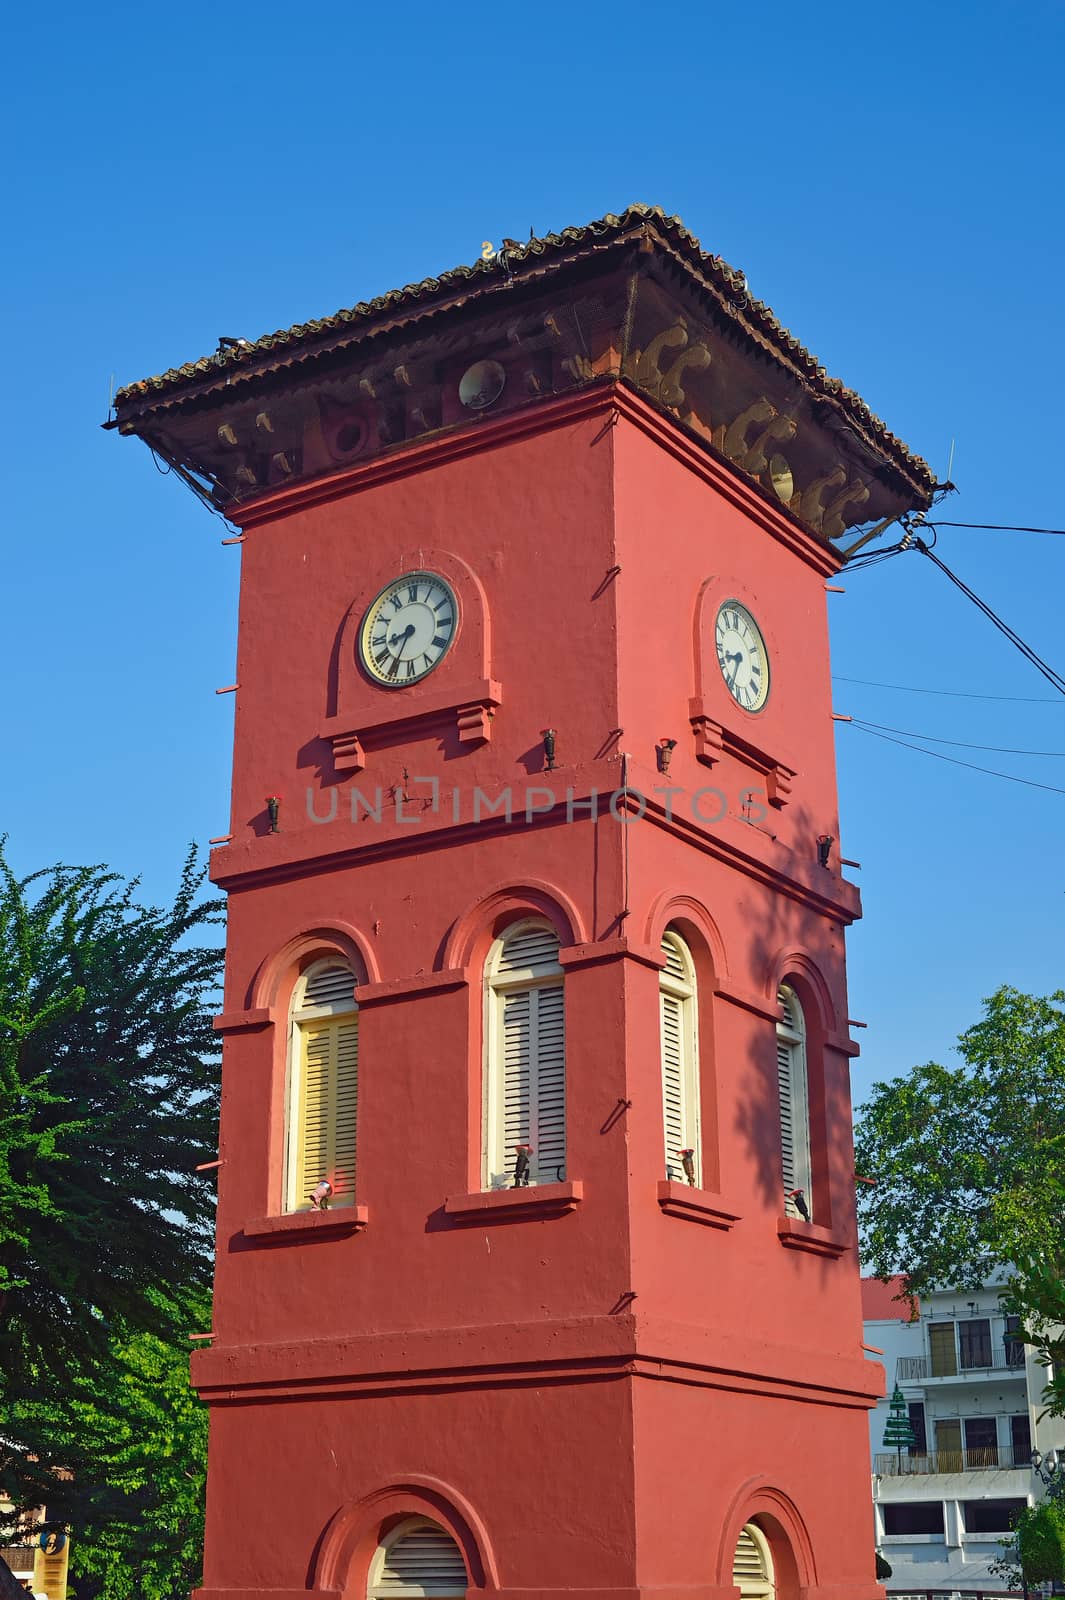 malacca historic old clock tower by think4photop